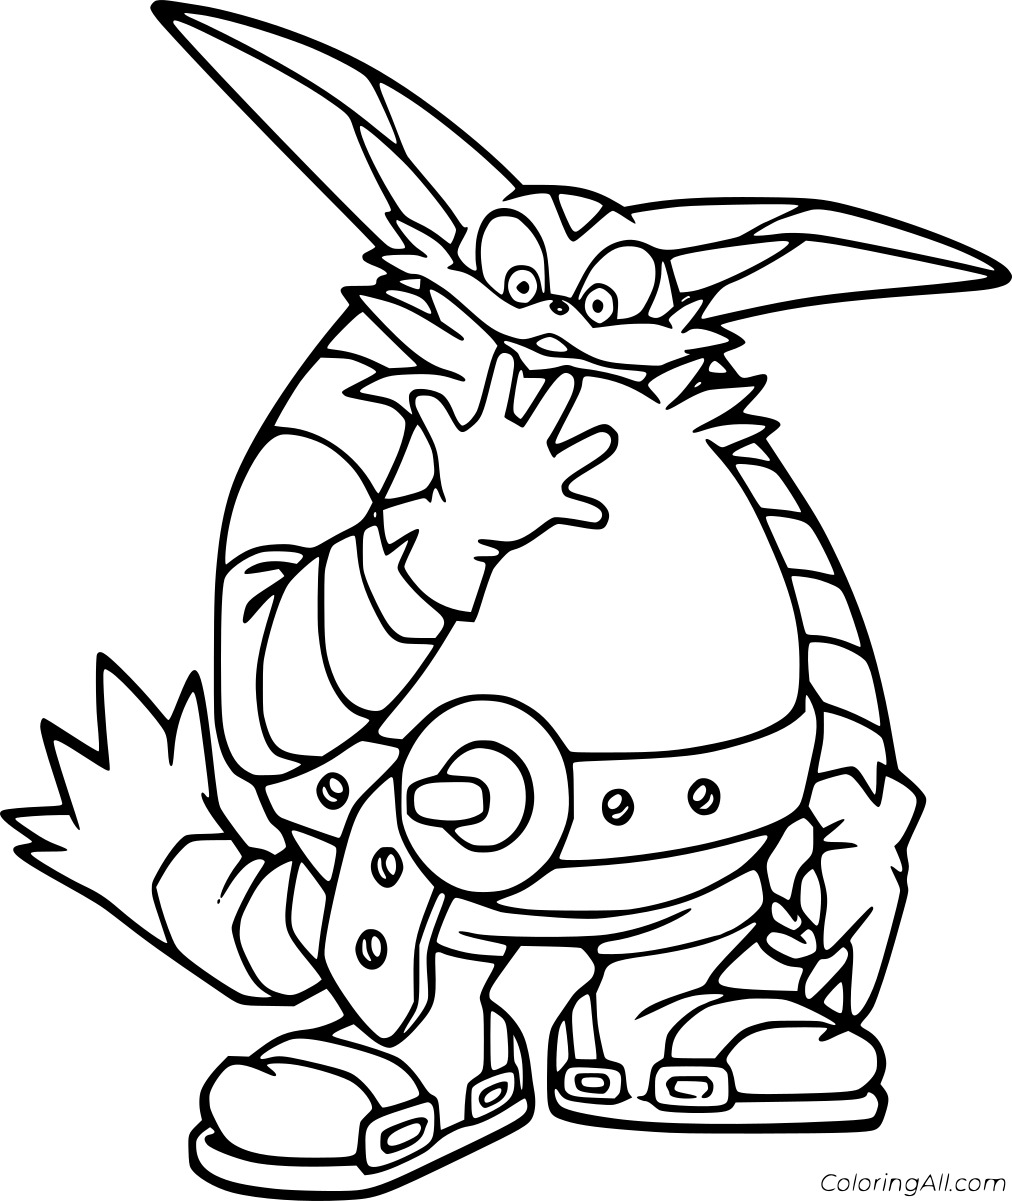 Big the Cat Free Printable Coloring Page